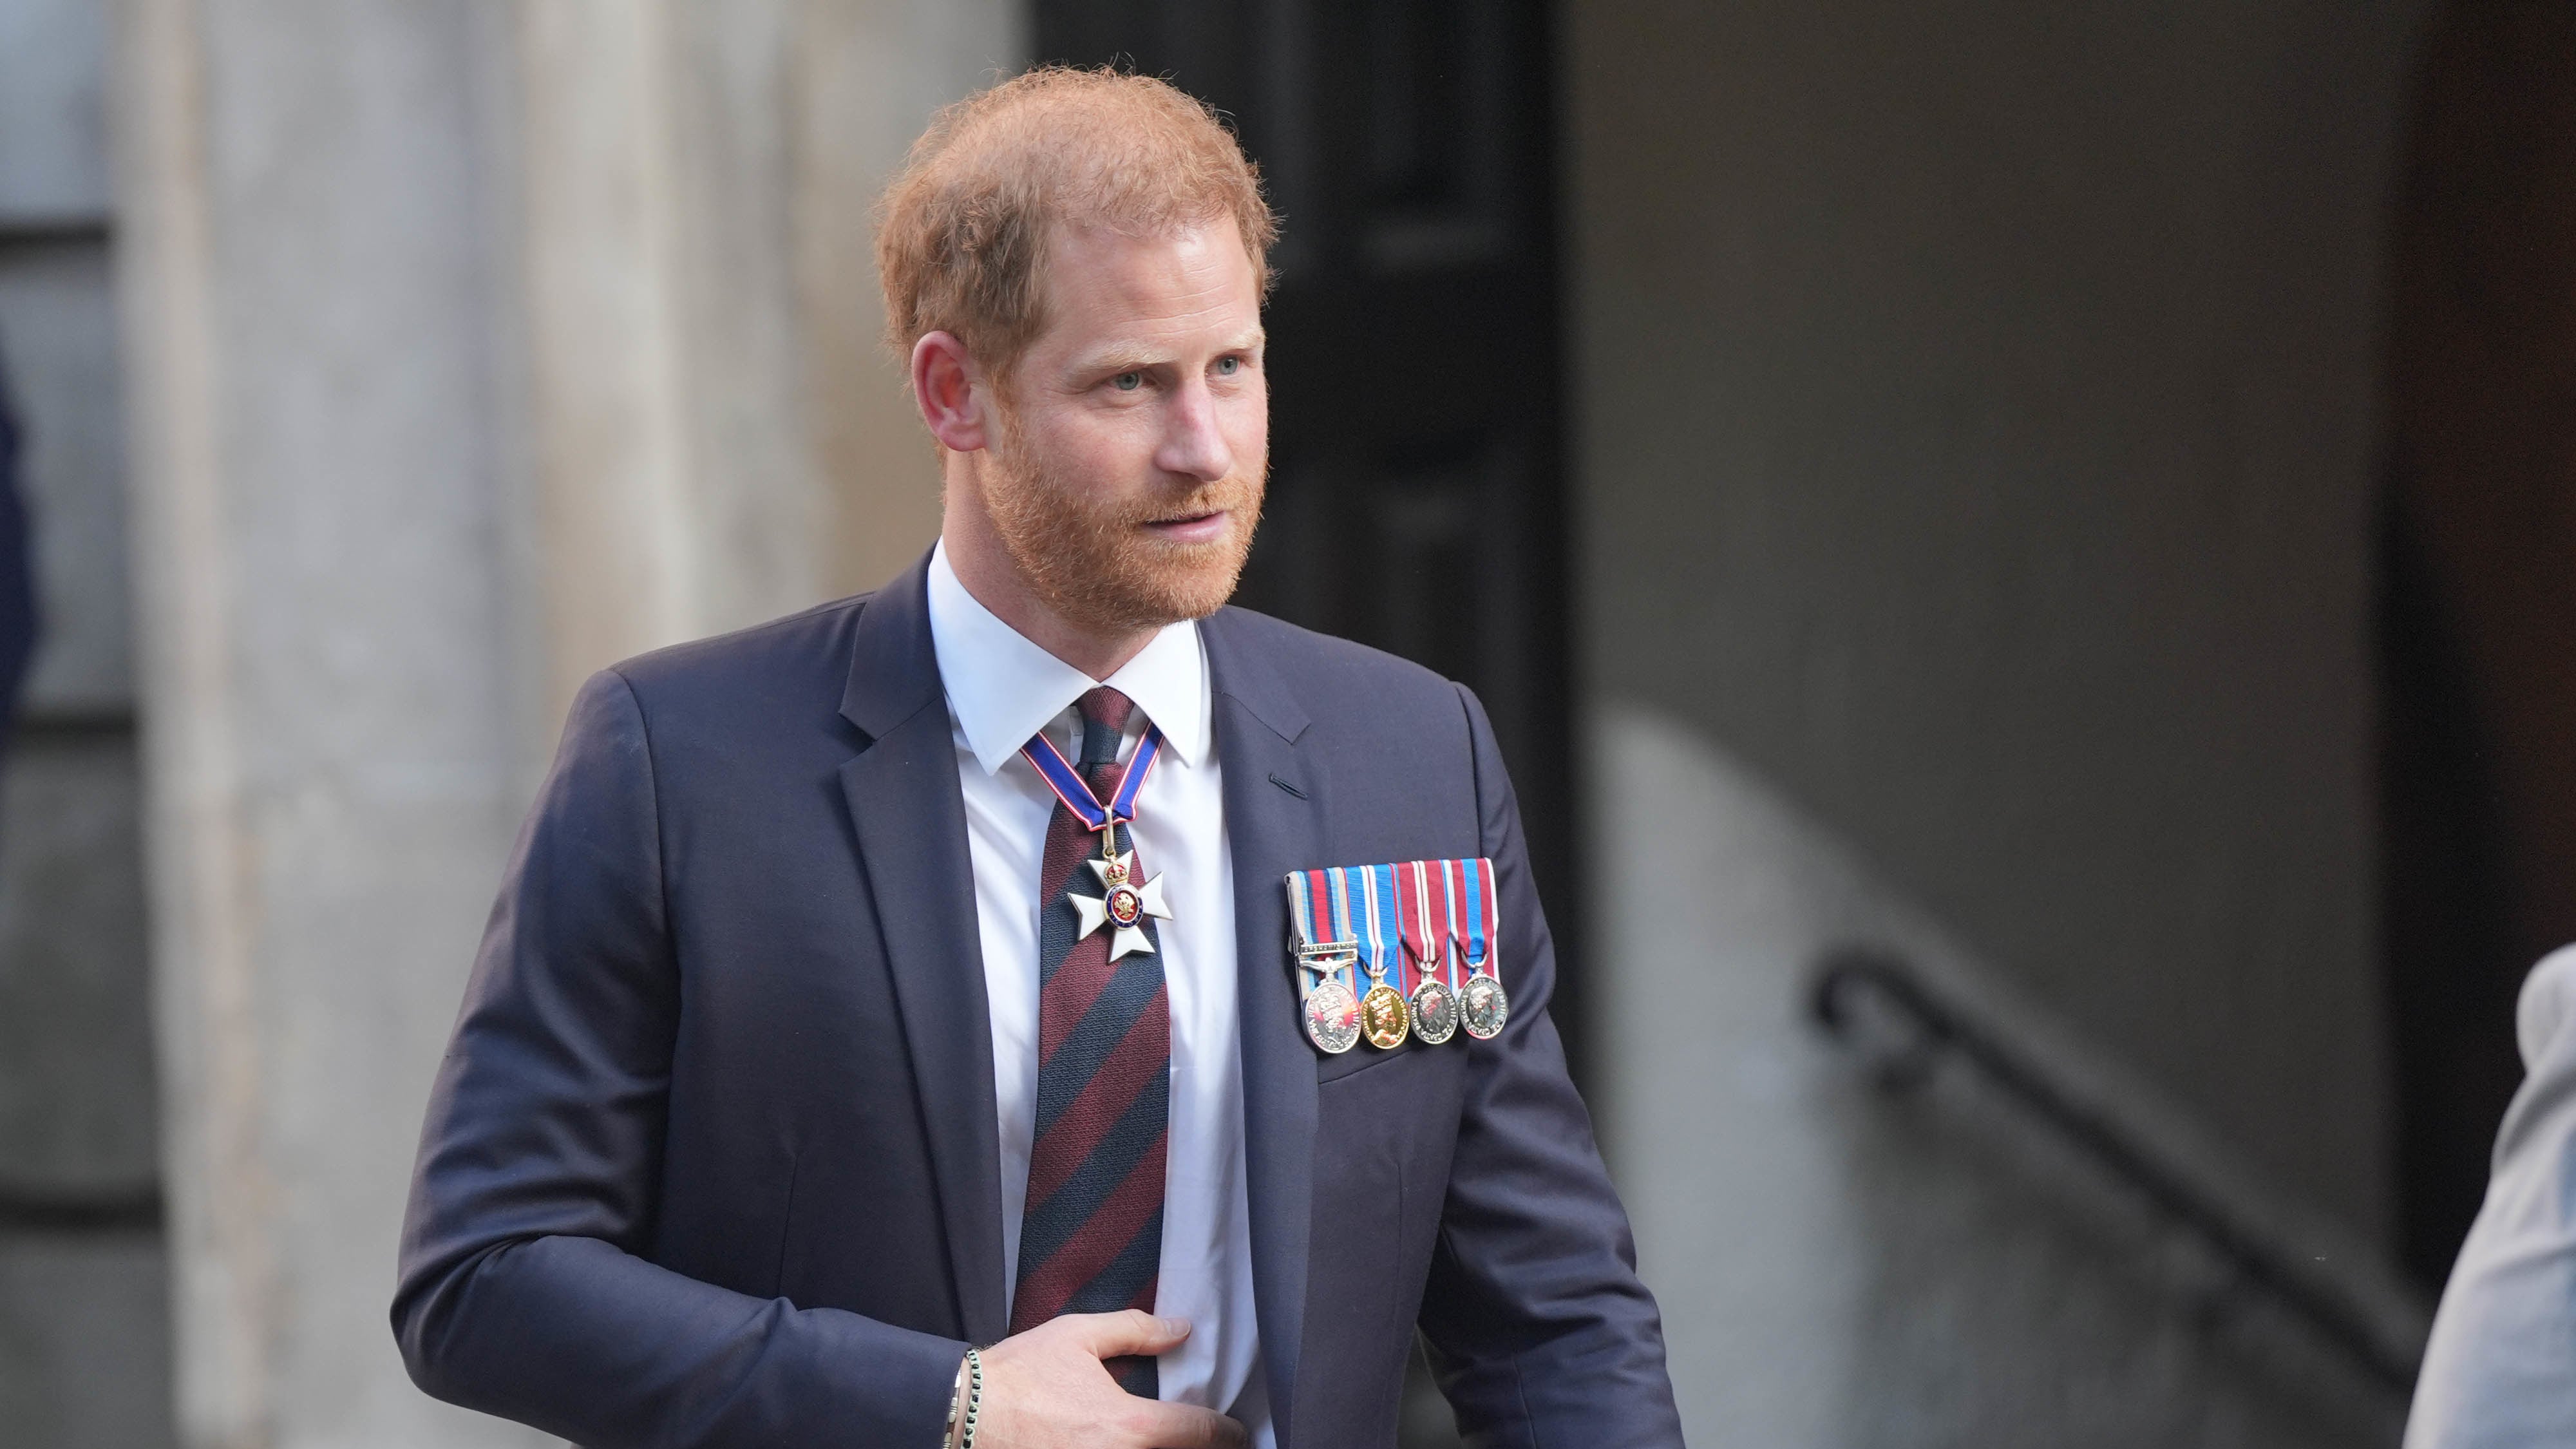 The Duke of Sussex is bringing a High Court claim against News Group Newspapers over allegations of unlawful information gathering